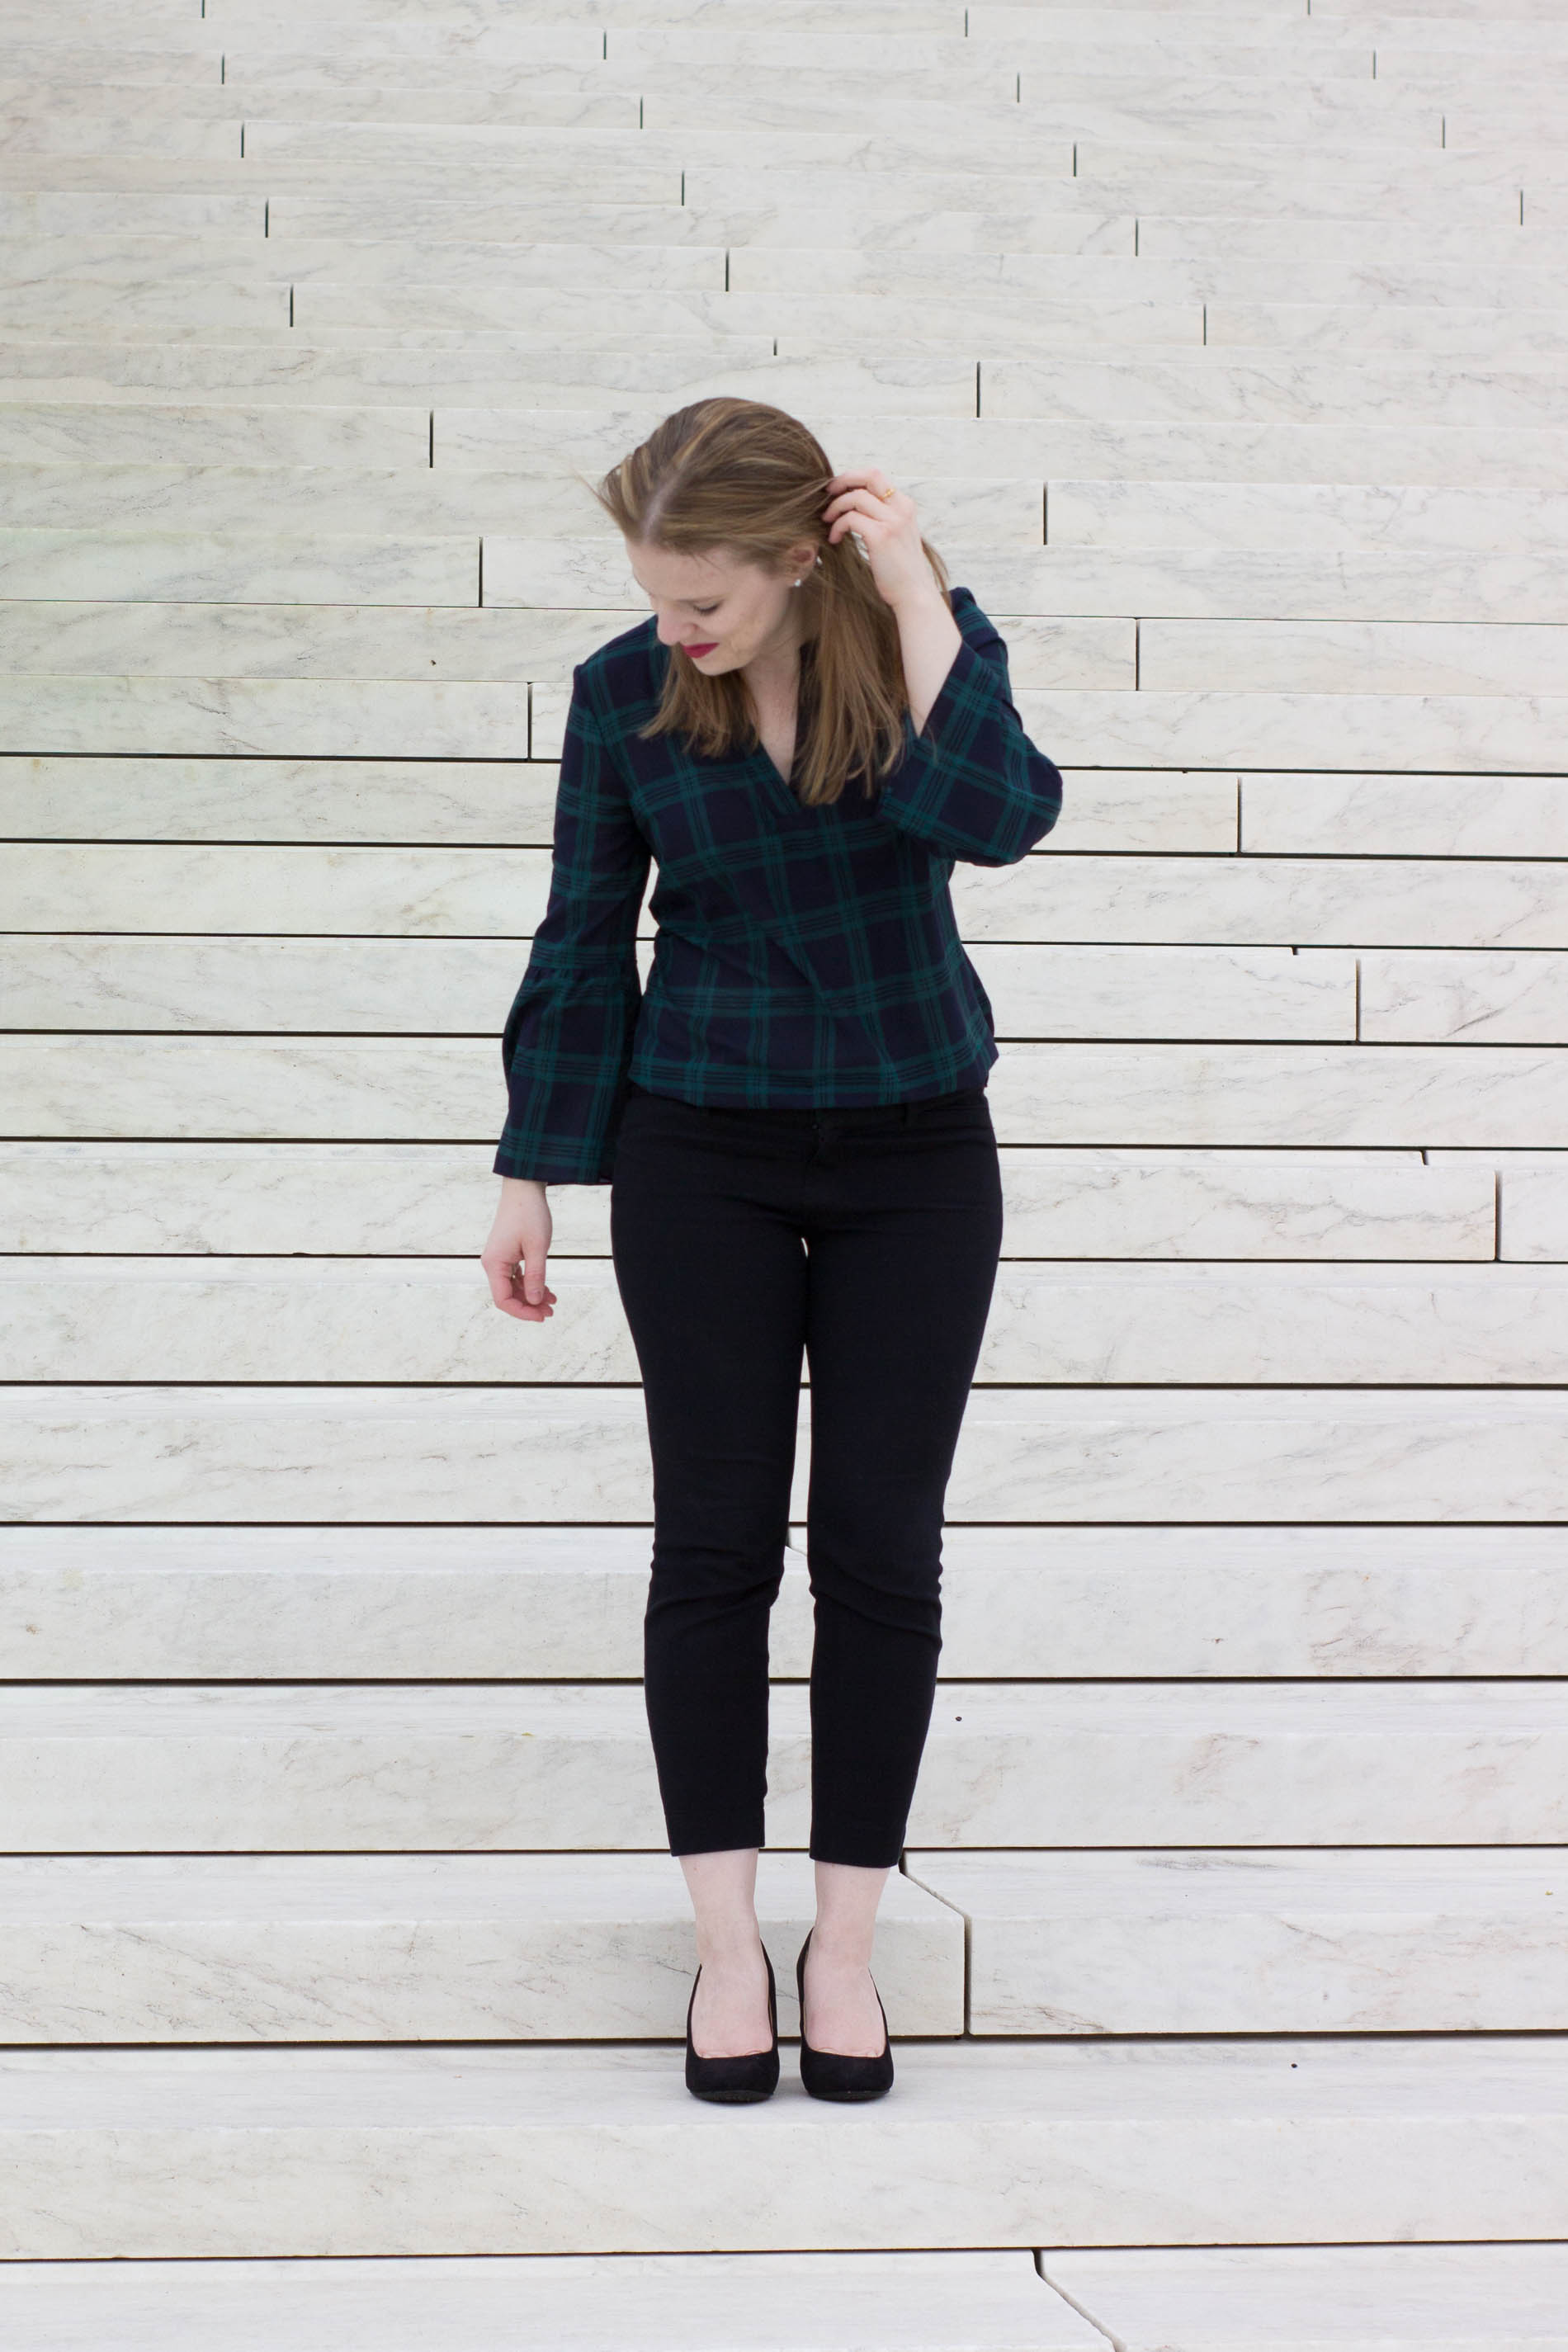 DC woman blogger wearing plaid top